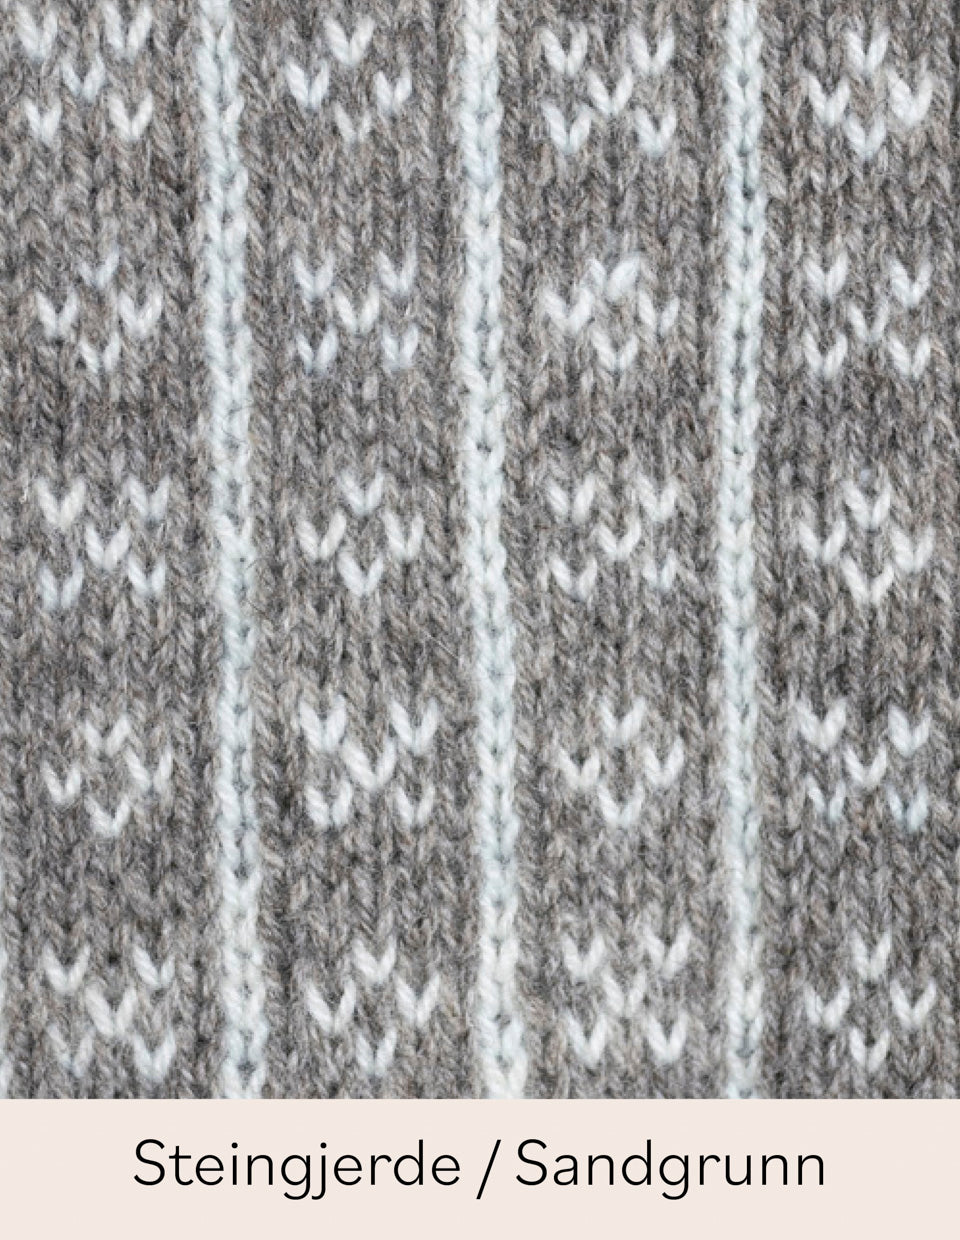 Islander sweater with stripes, 3-ply, knitting kit